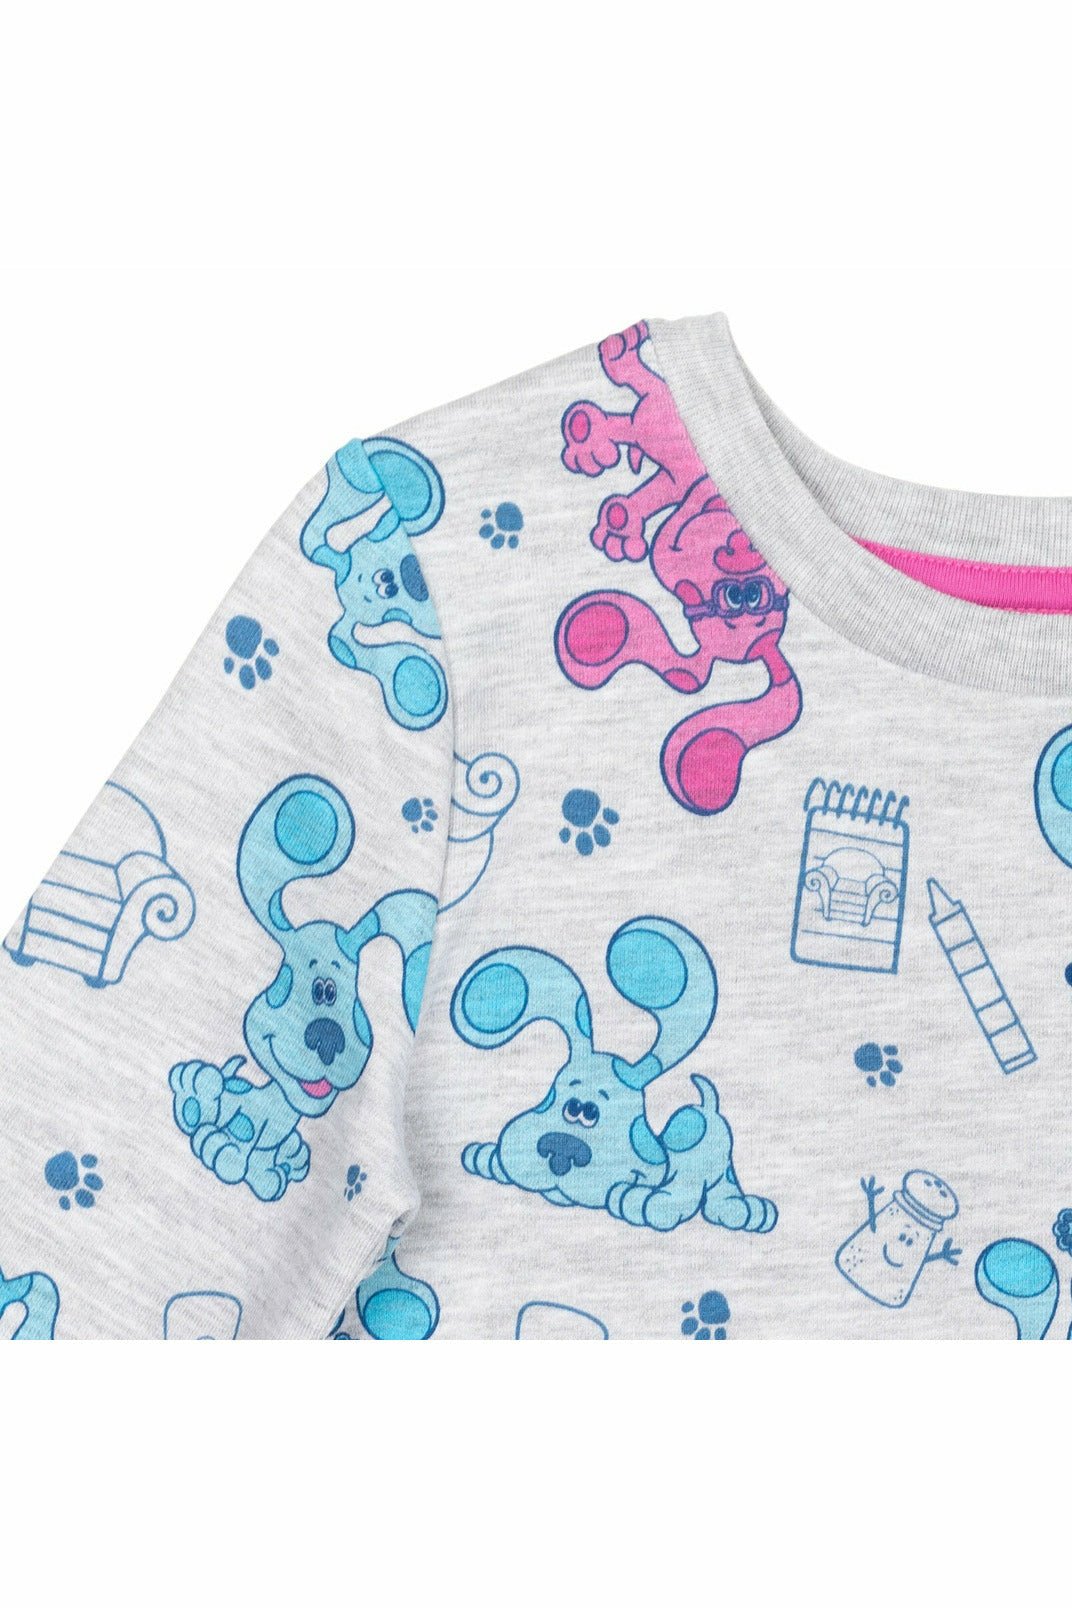 Blue's Clues & You! French Terry Pullover Sweatshirt - imagikids